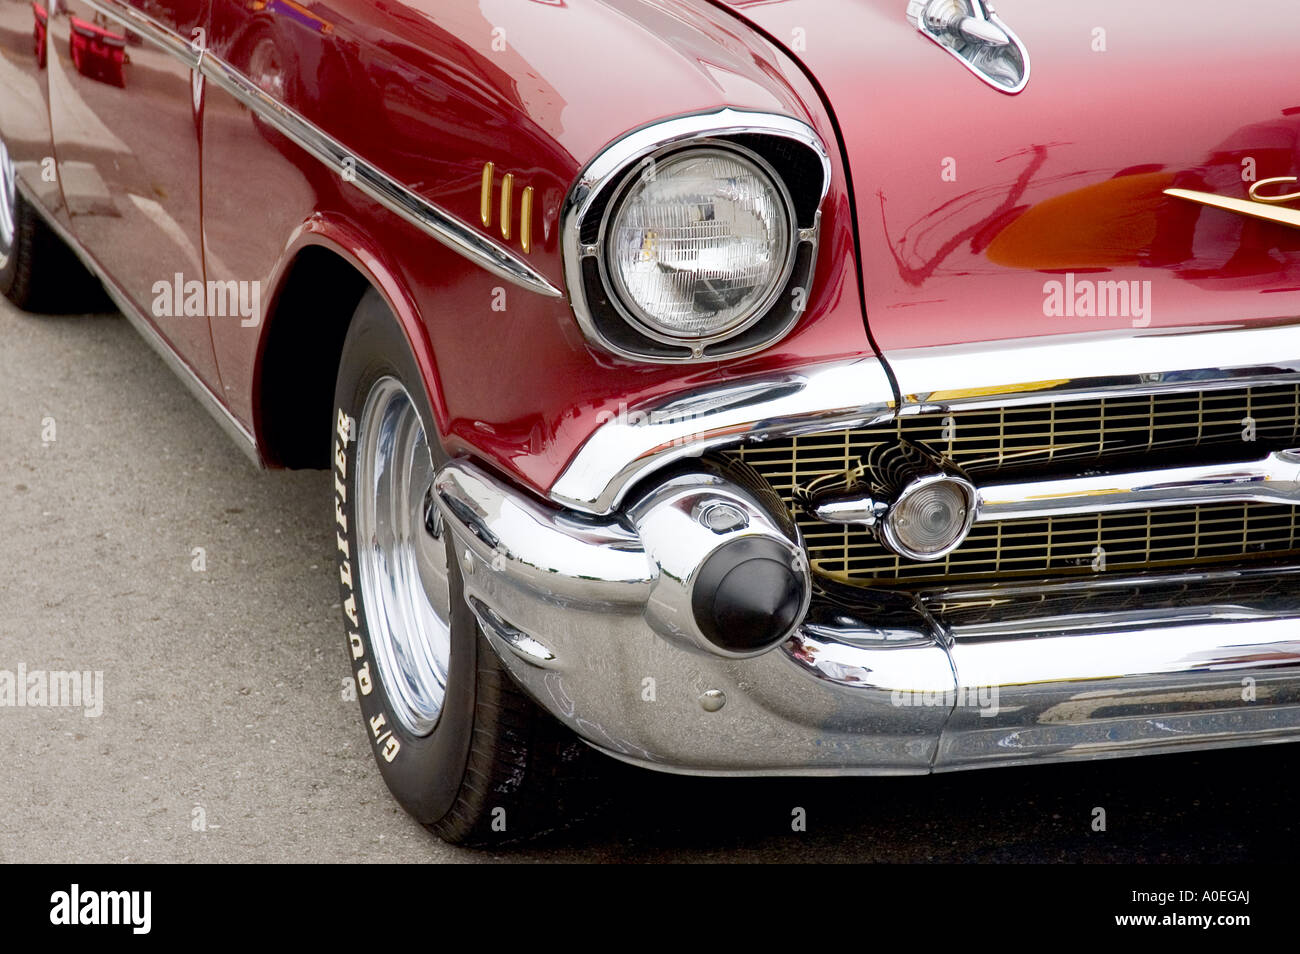 1957 Chevy Classic Car Stock Photo